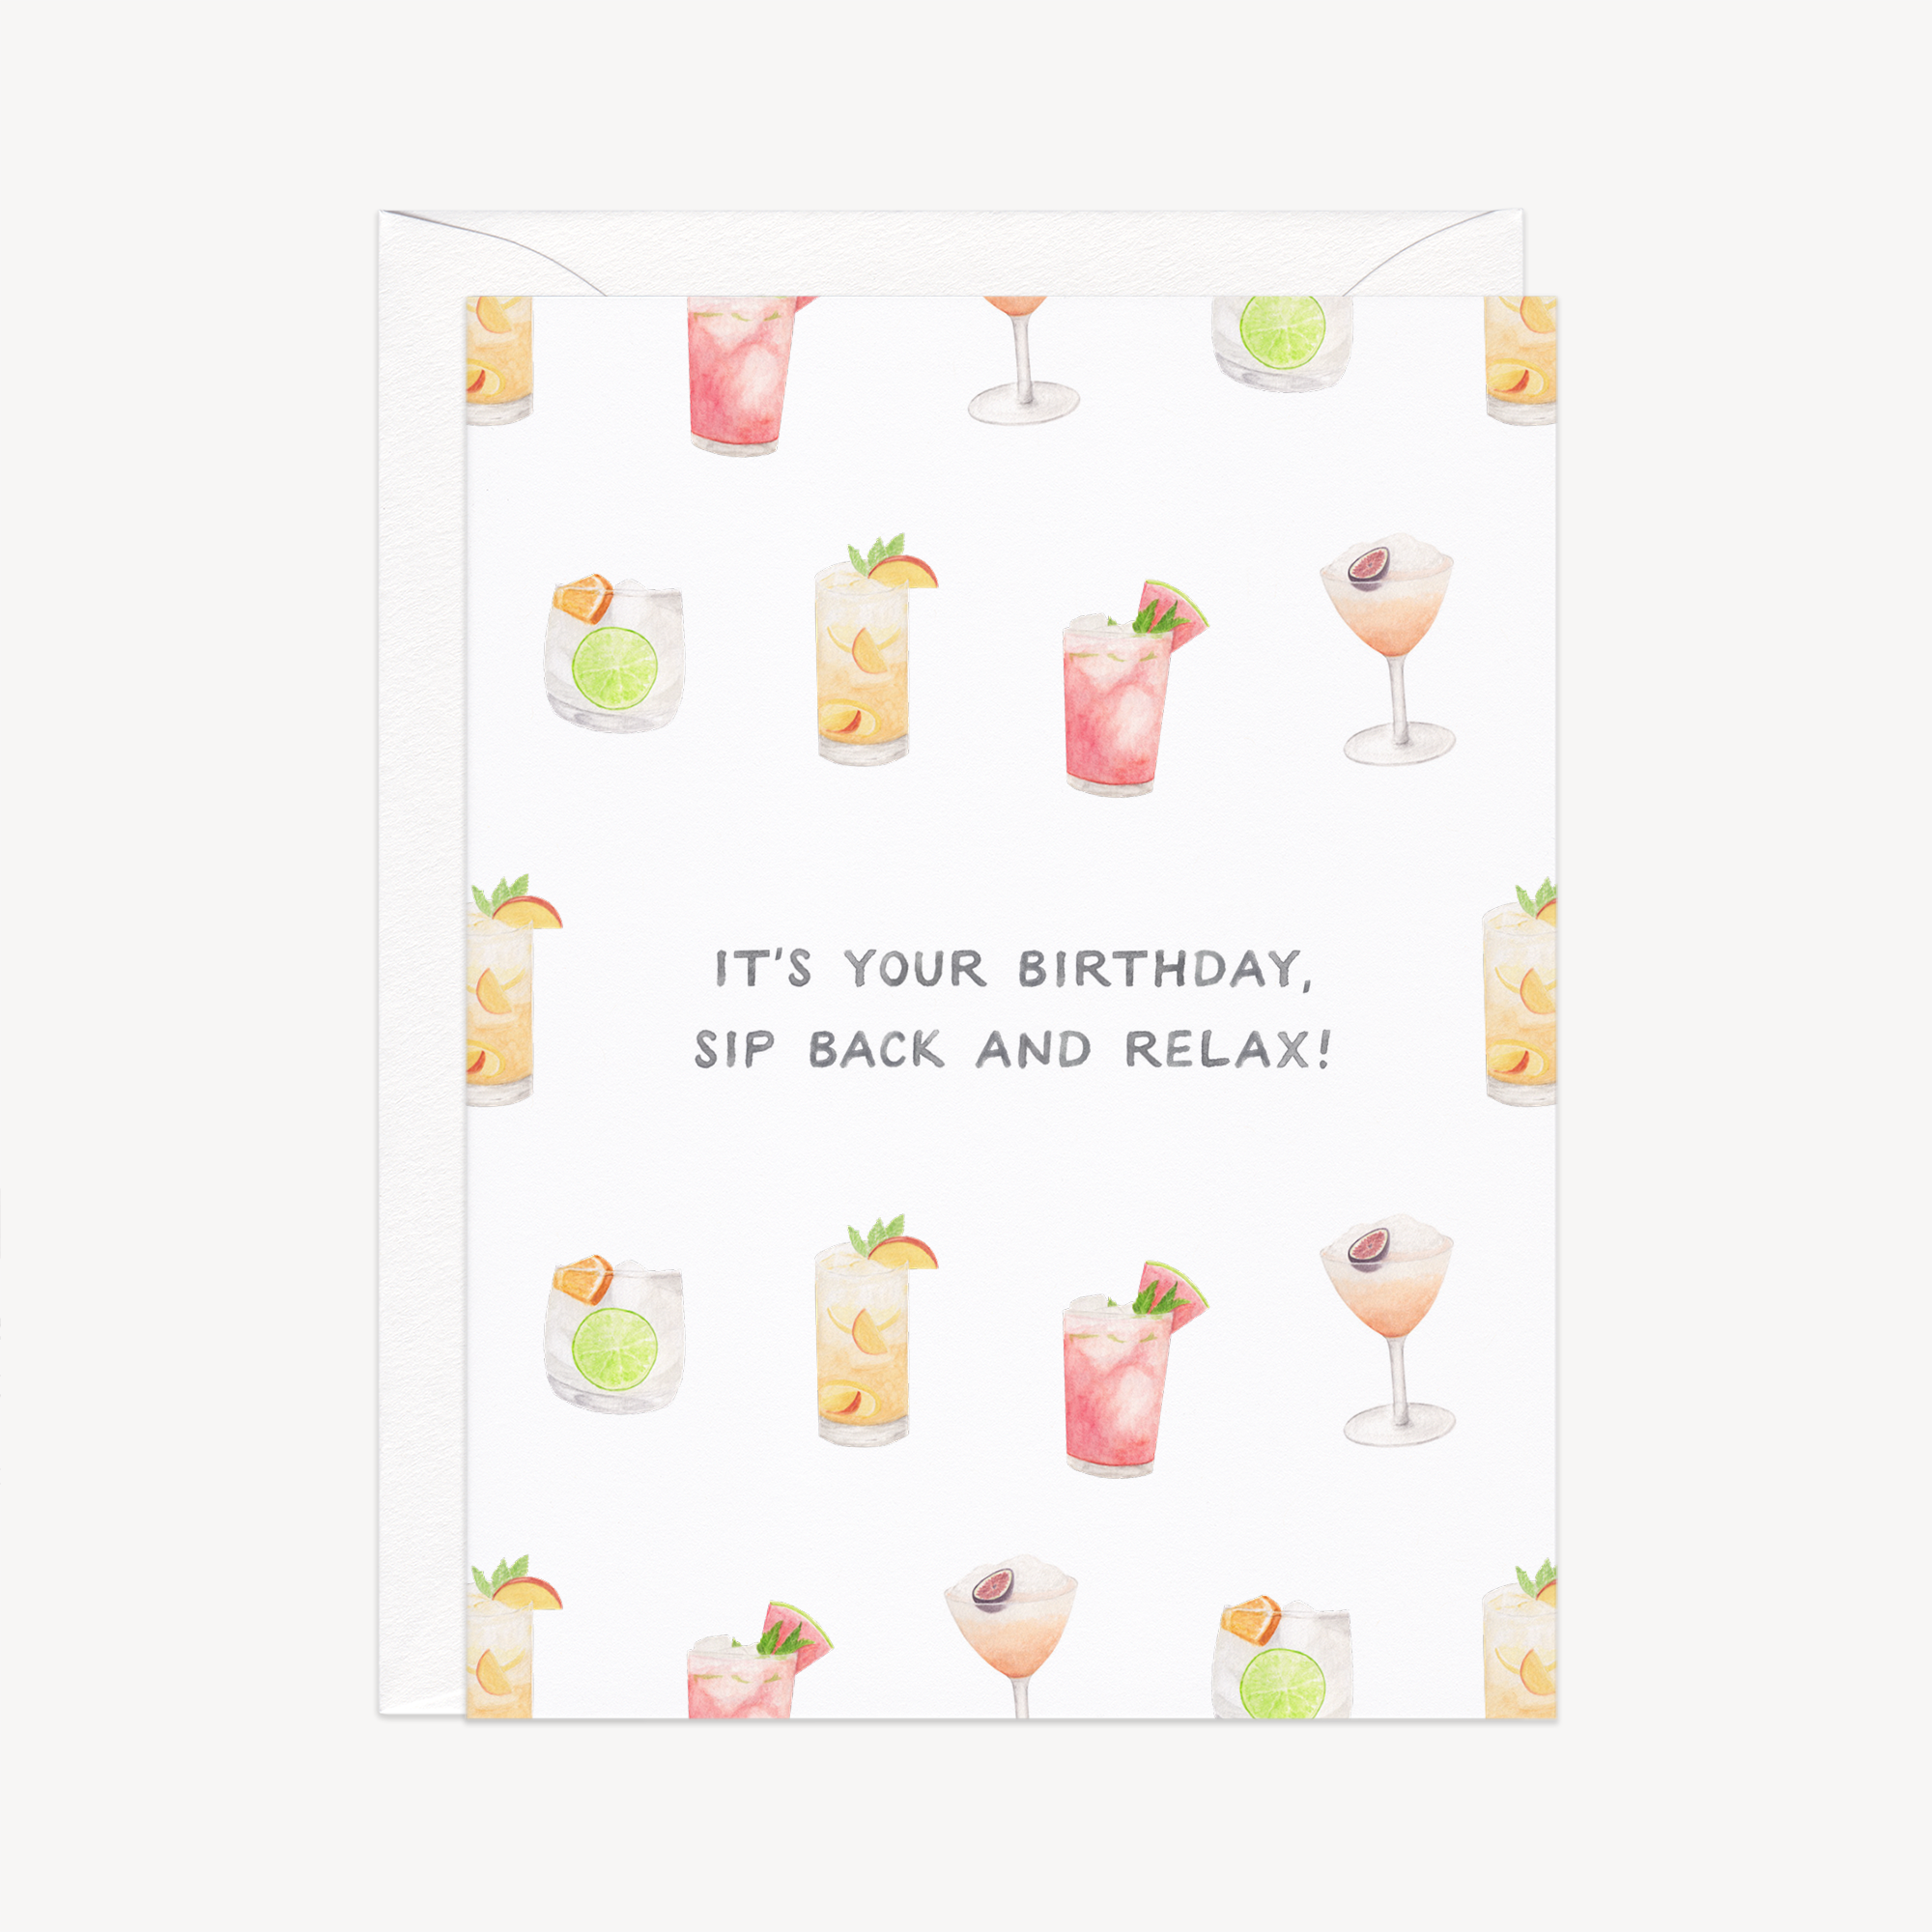 Sip Back And Relax Birthday Card